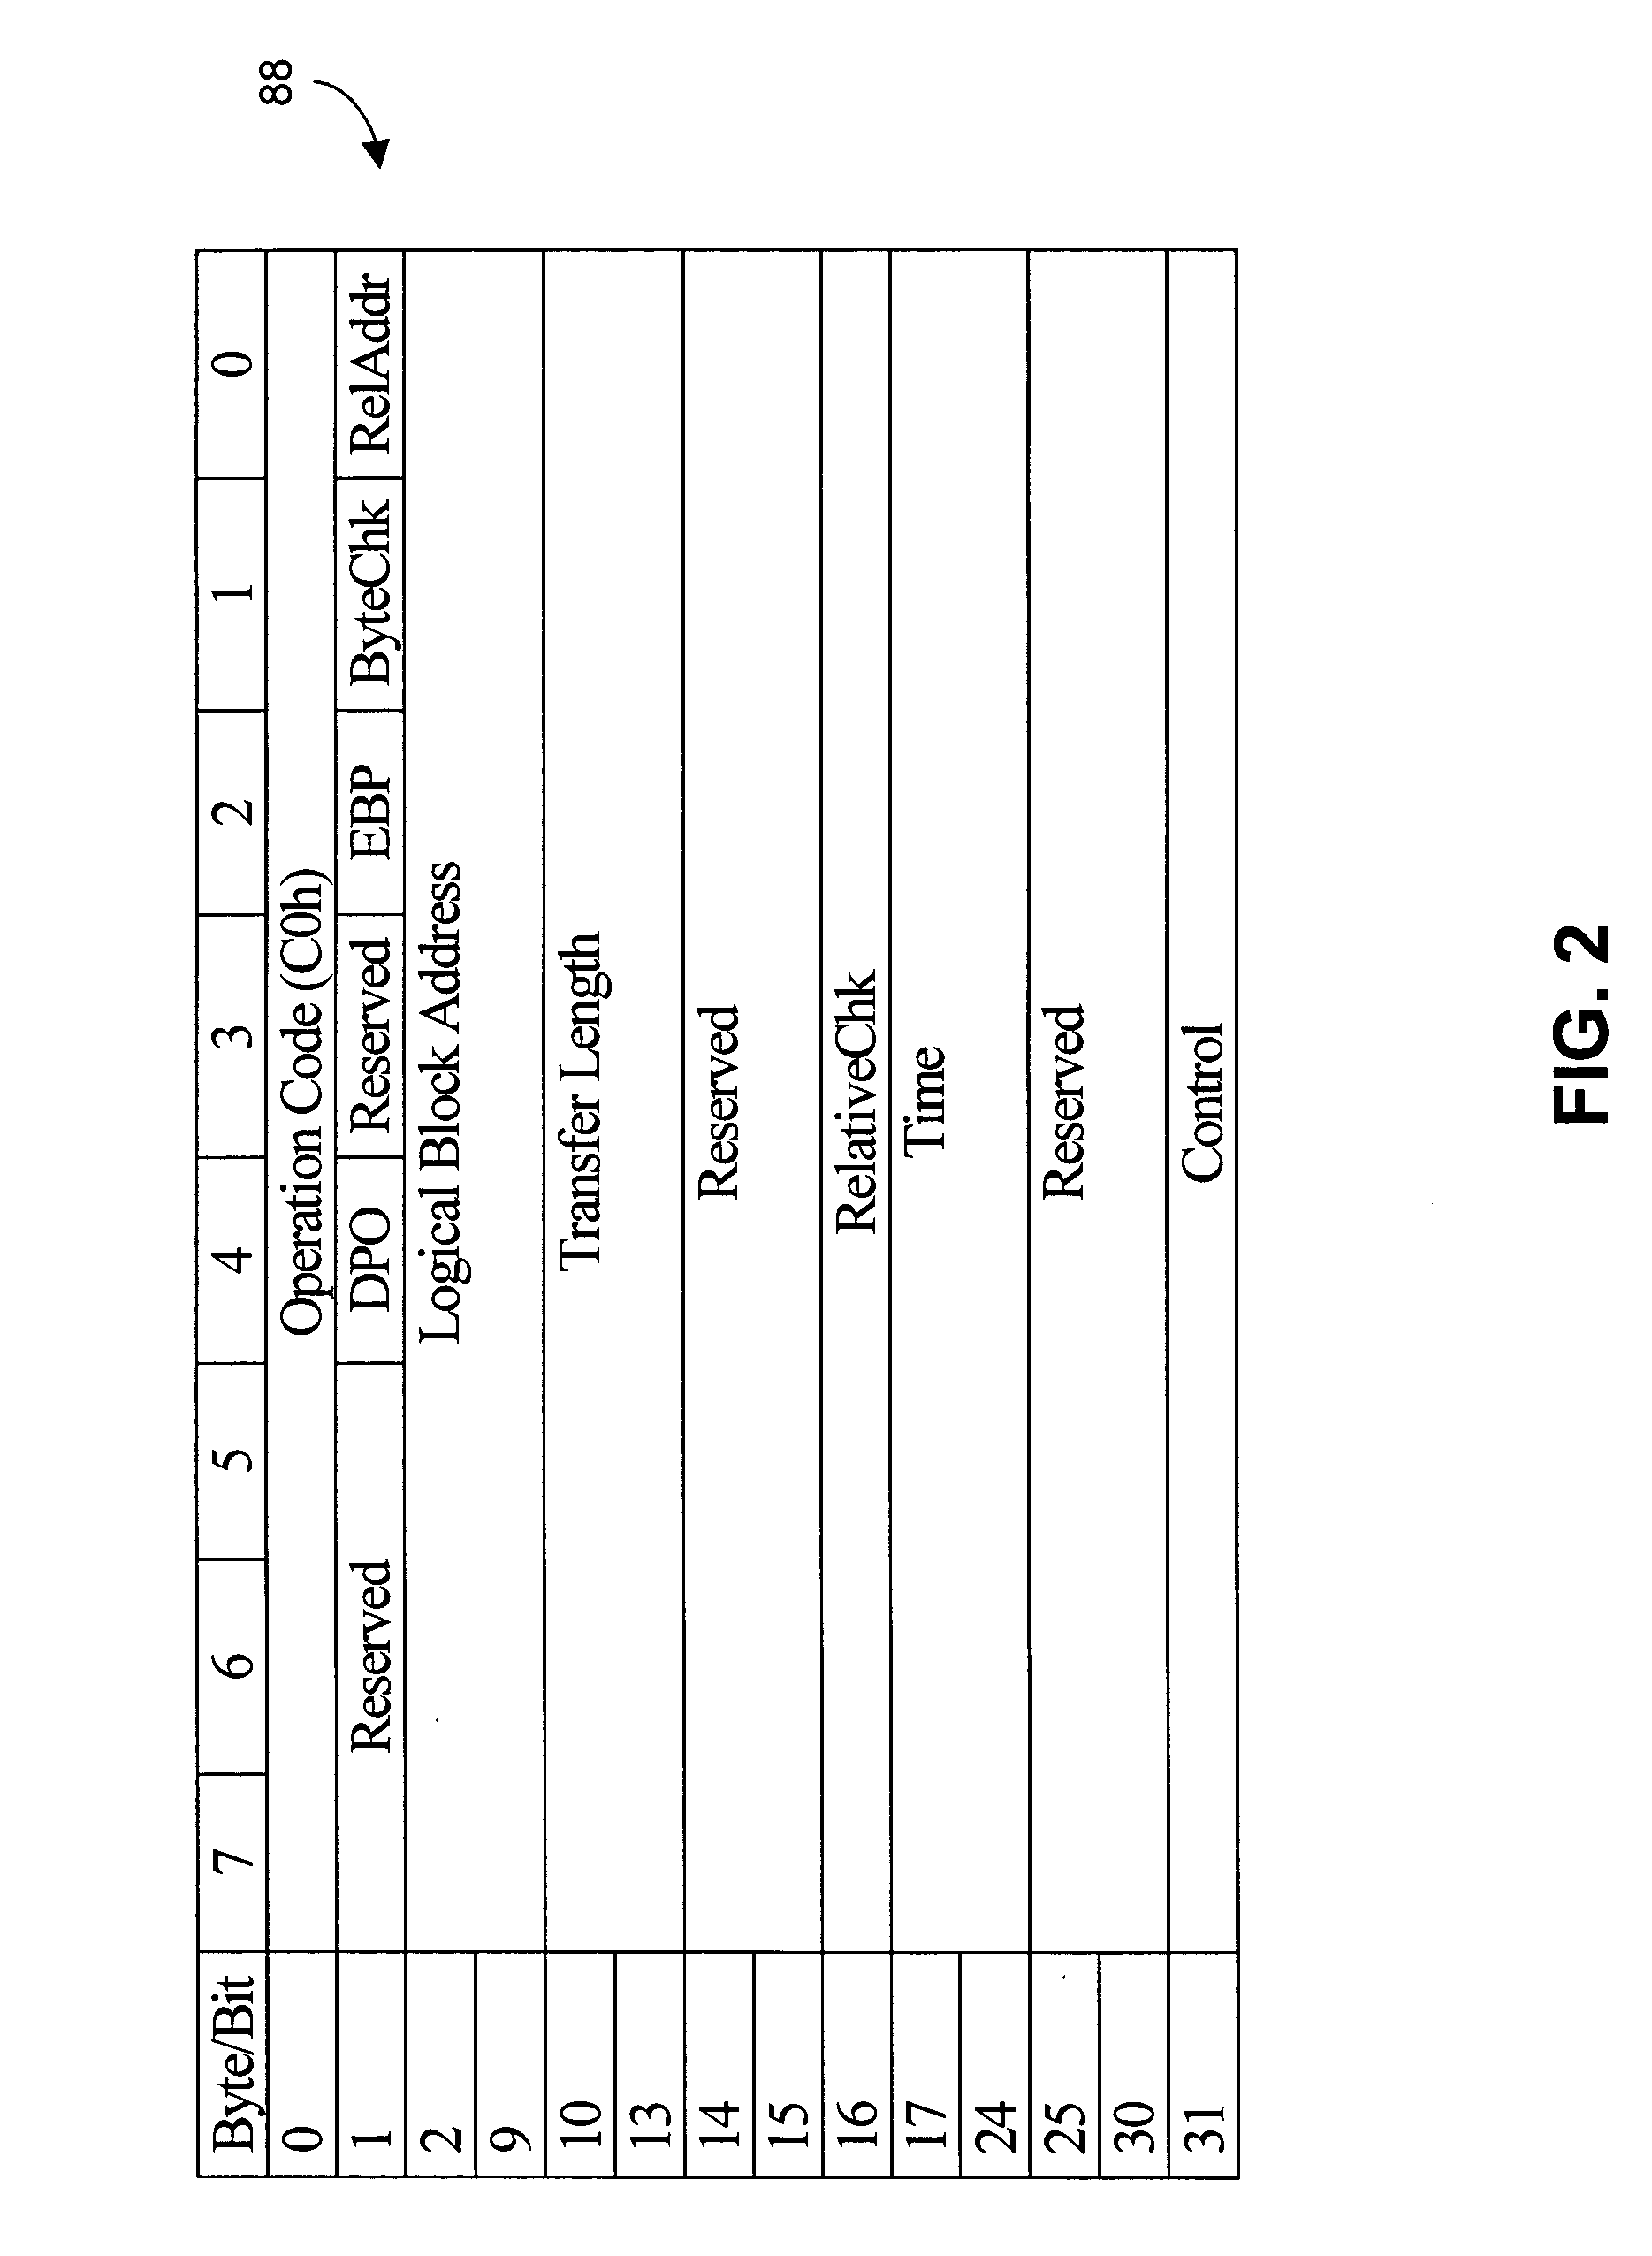 Method for identifying the time at which data was written to a data store